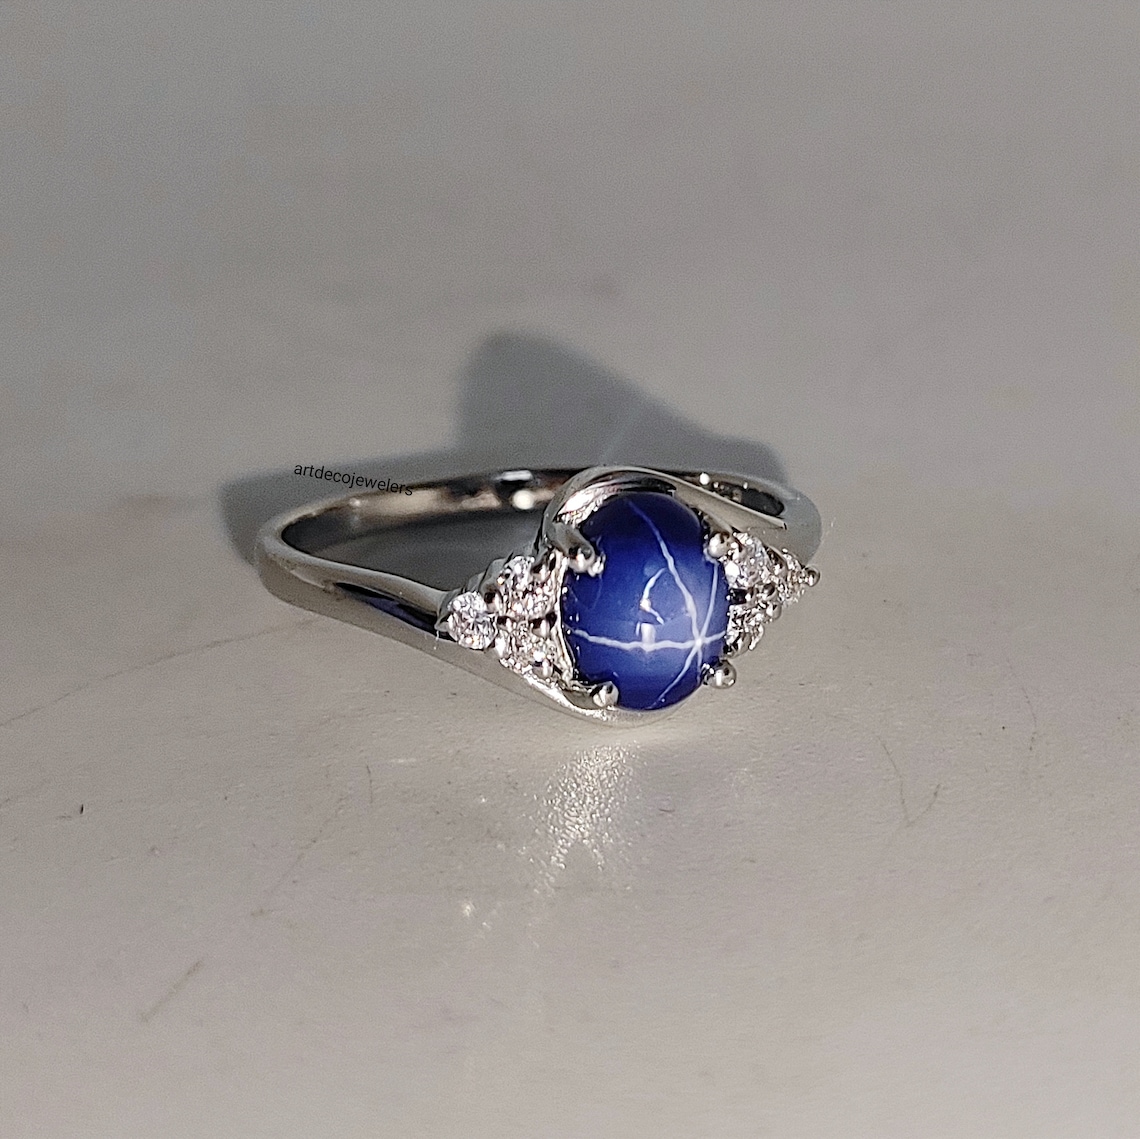 Blue Star Sapphire Ring, Linde Star Sapphire Ring, 6 Rays Star, 68mm ...